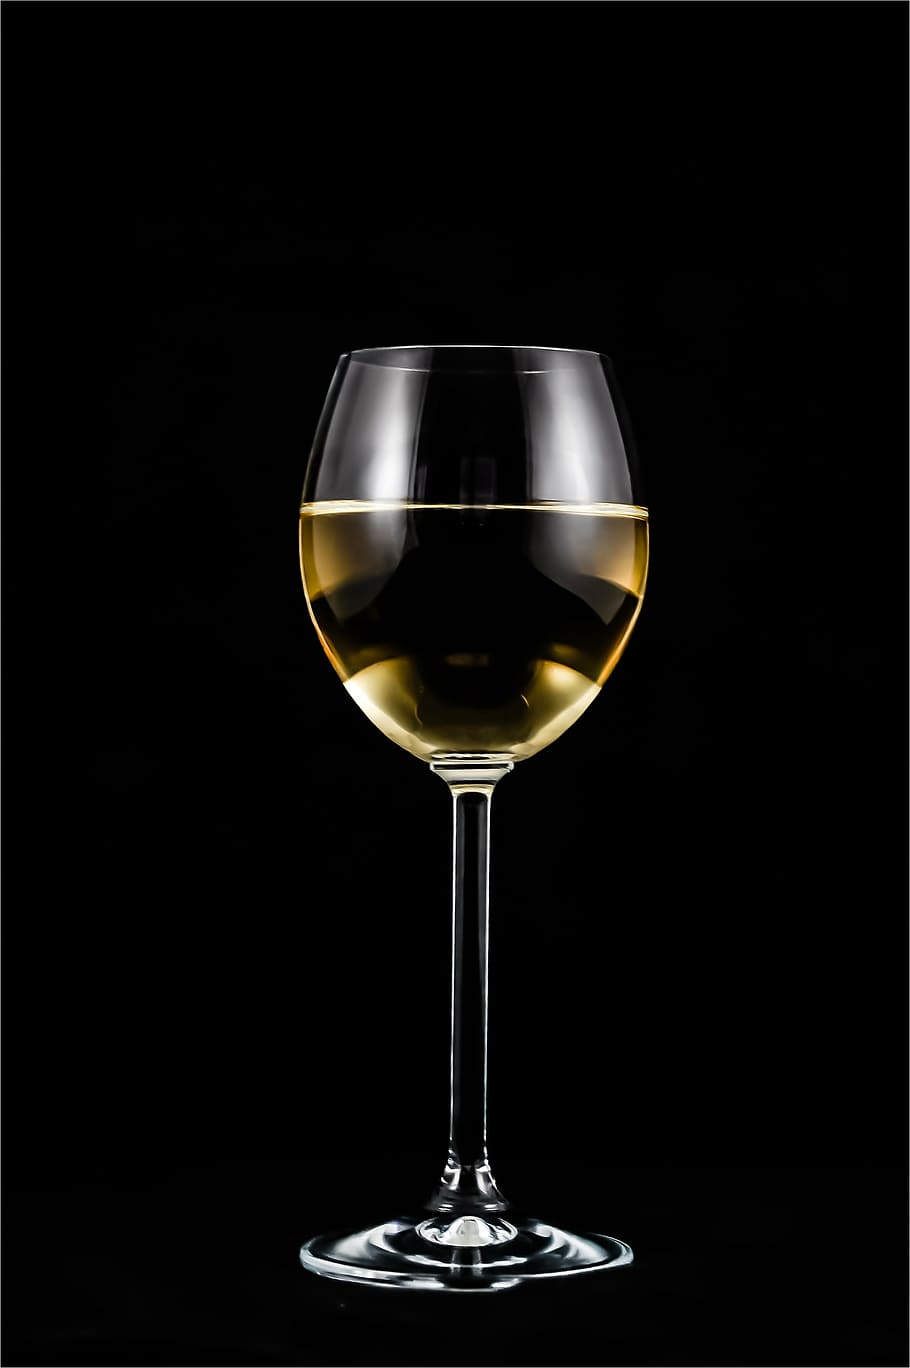 photograph, glass, white, black, background, a glass of wine, wine, alcohol, wedding, a glass of